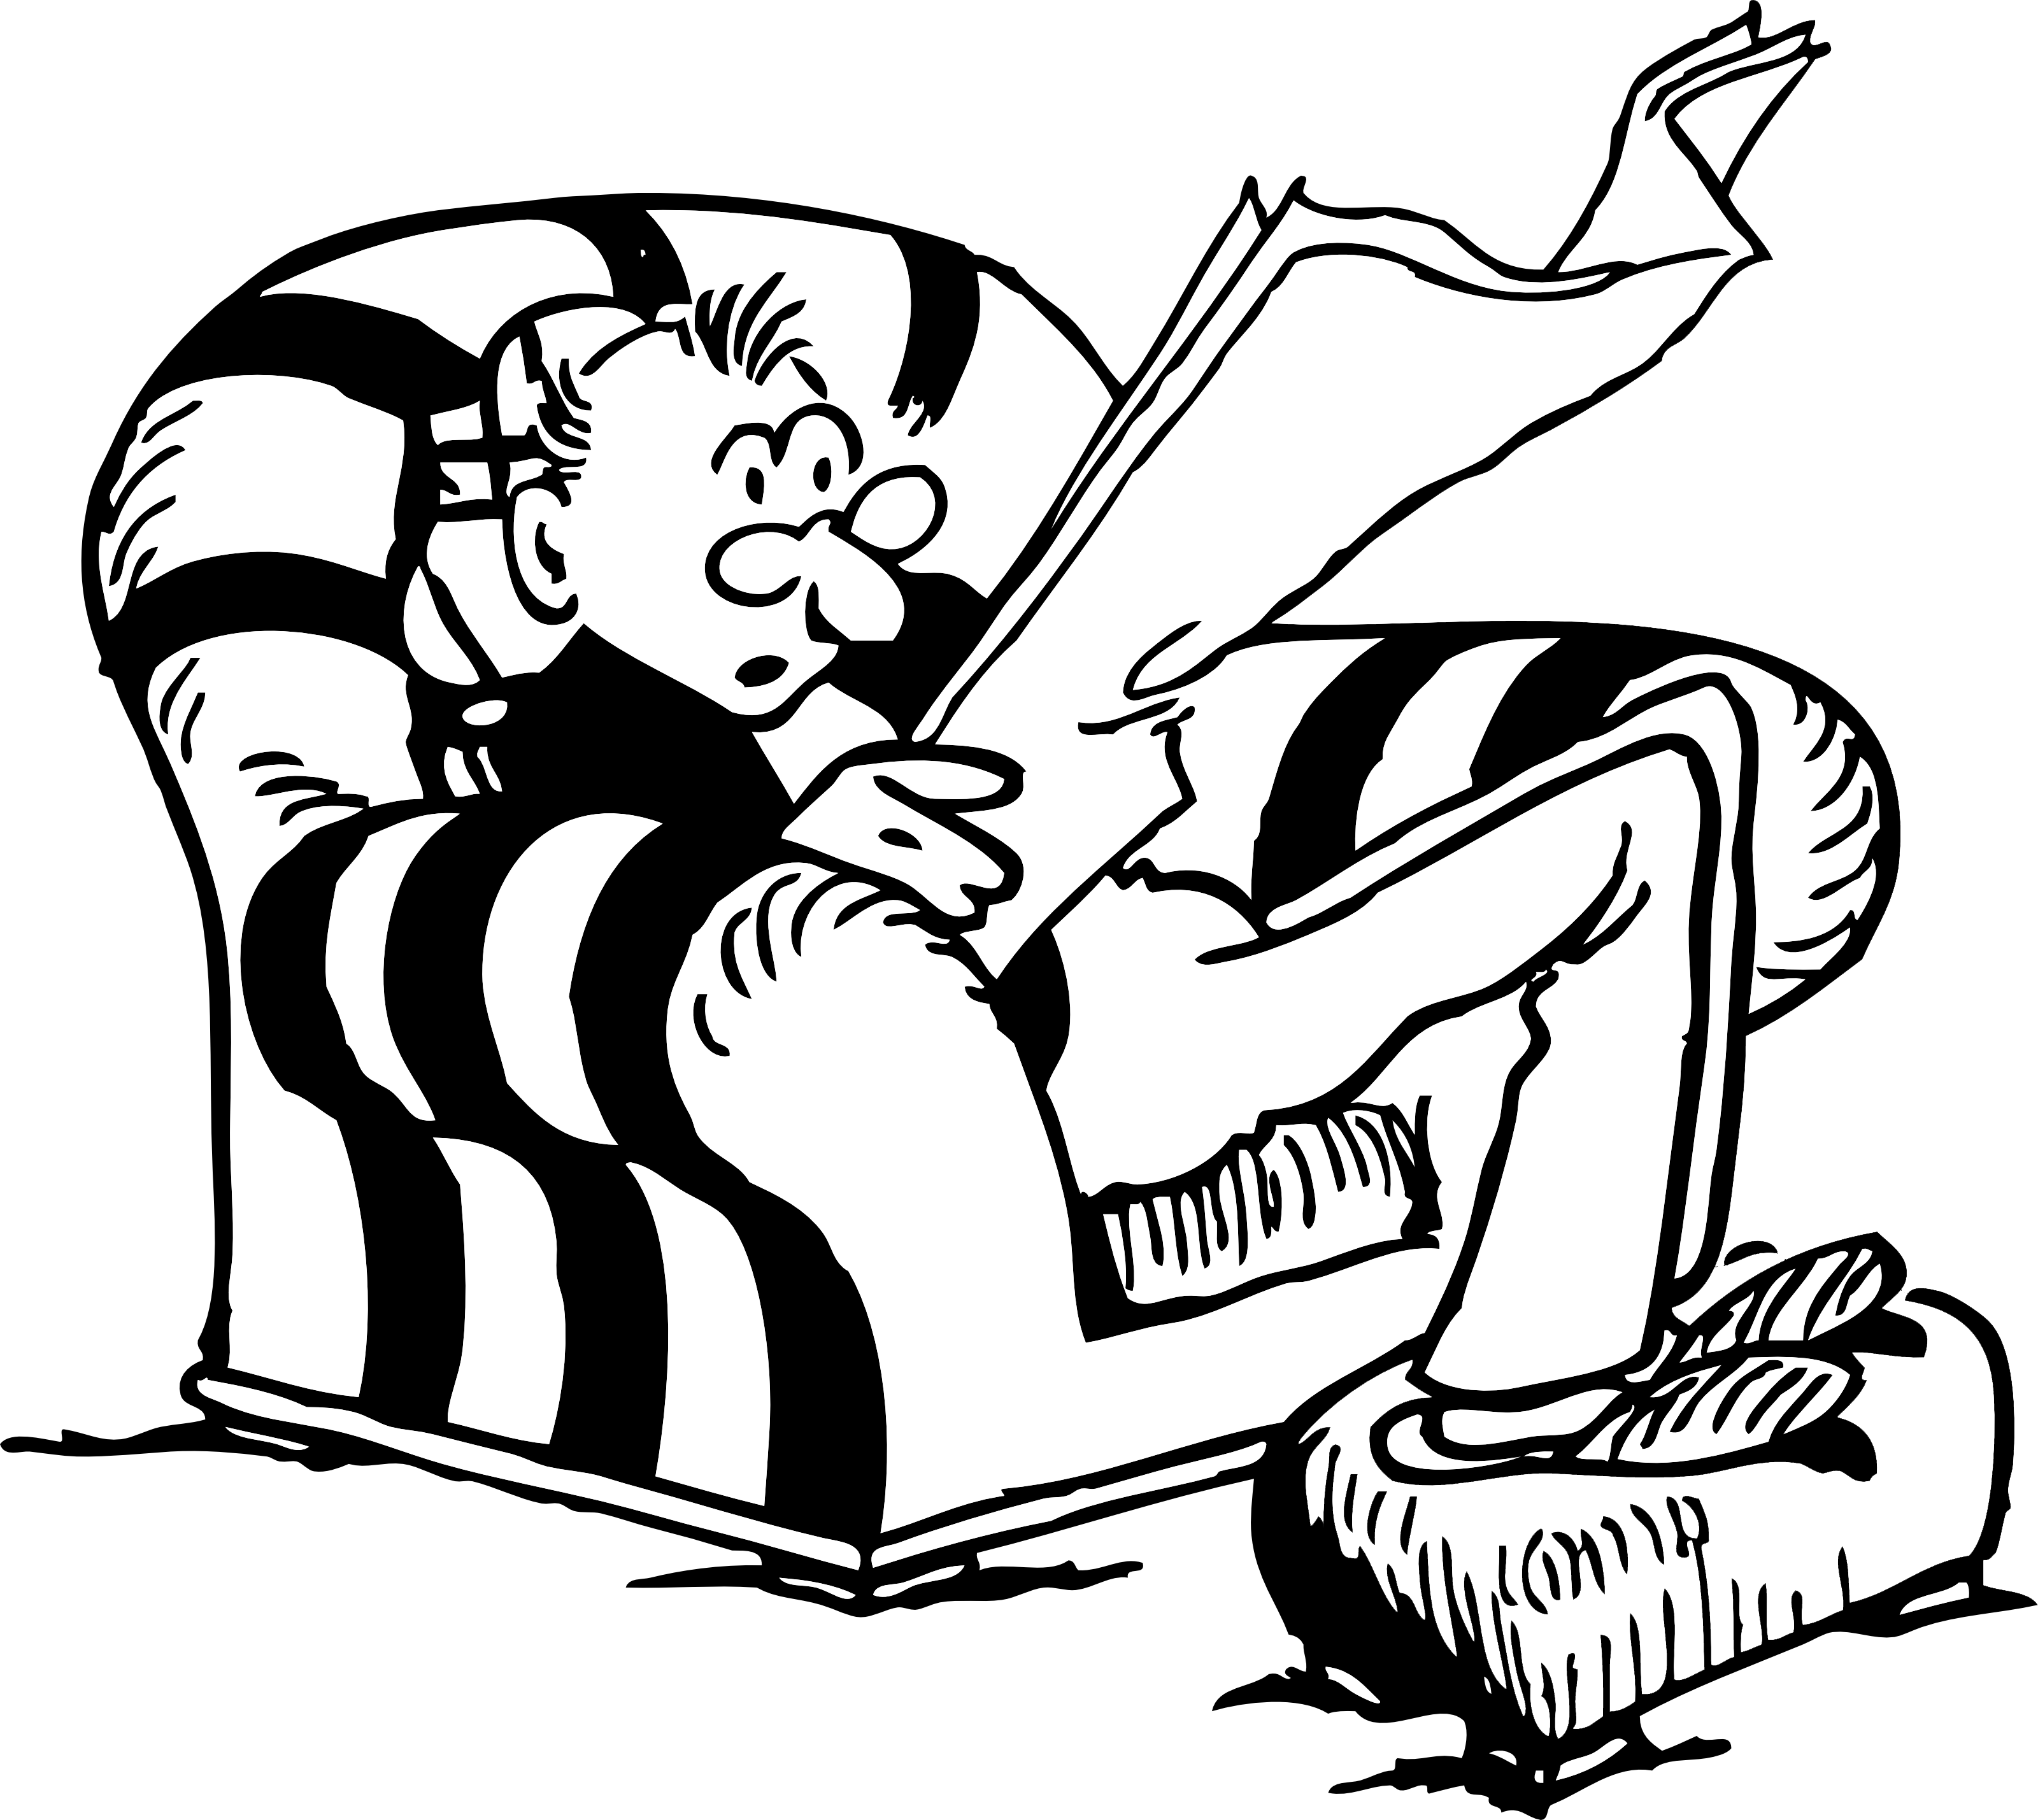 Free Retro Clipart Illustration Of A Man Sitting On Chair While.